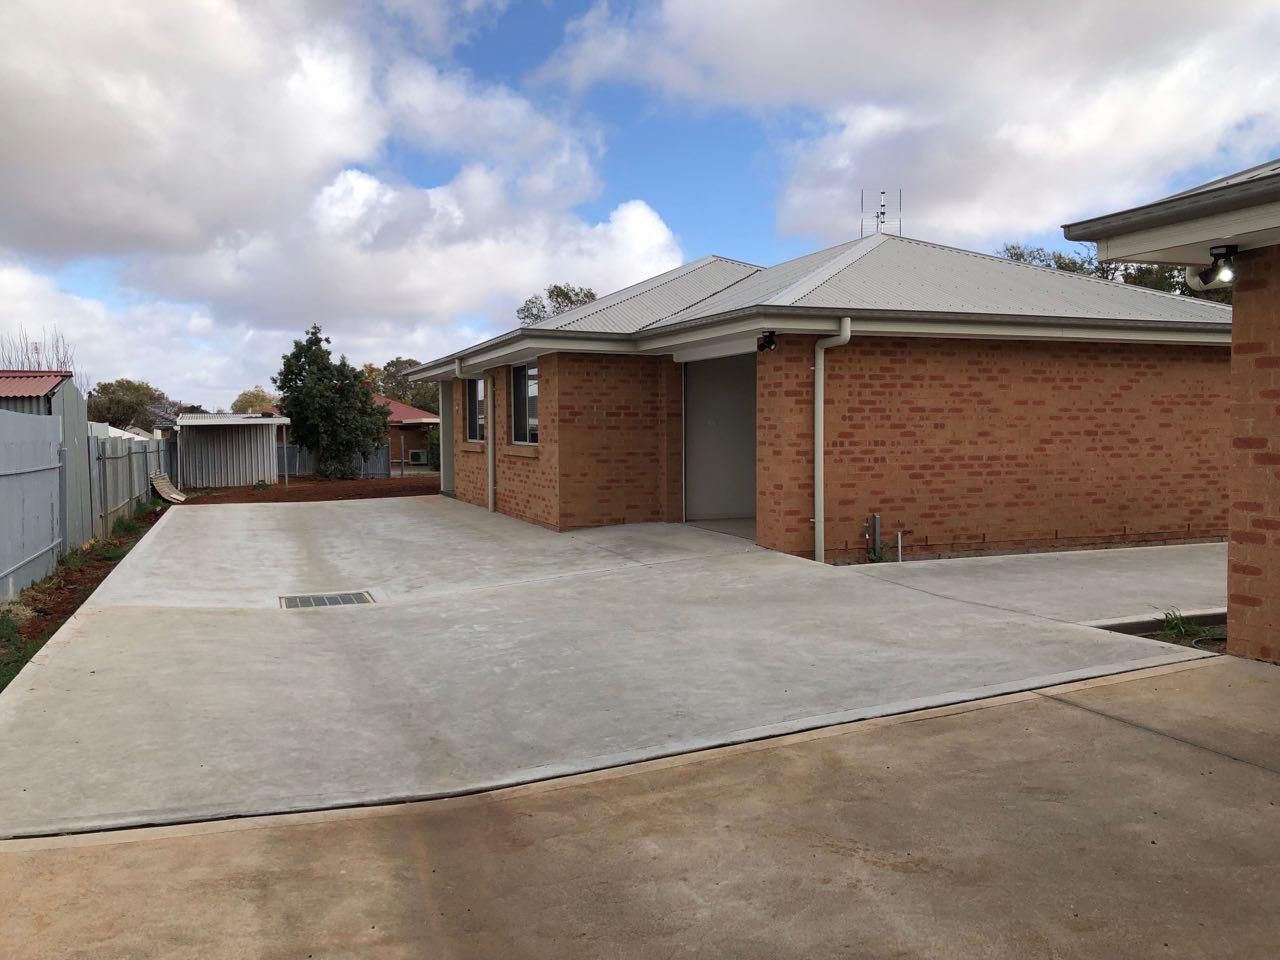 2 bedrooms House in 2/118 Currajong Street PARKES NSW, 2870